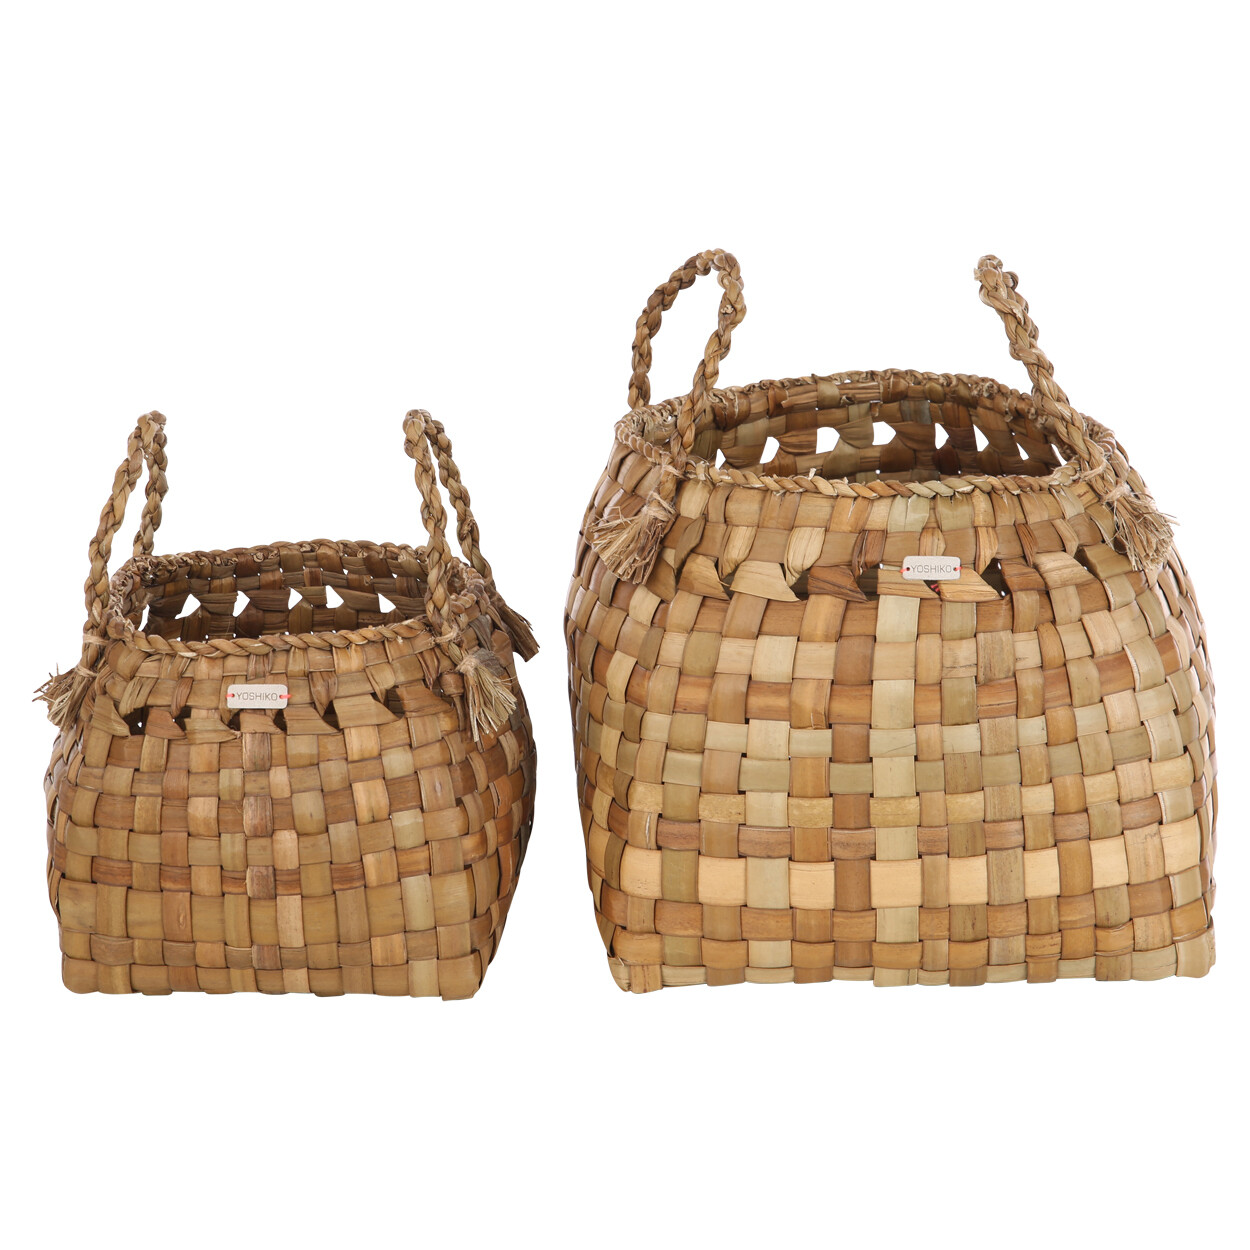 Wicker Basket with Handles - Large